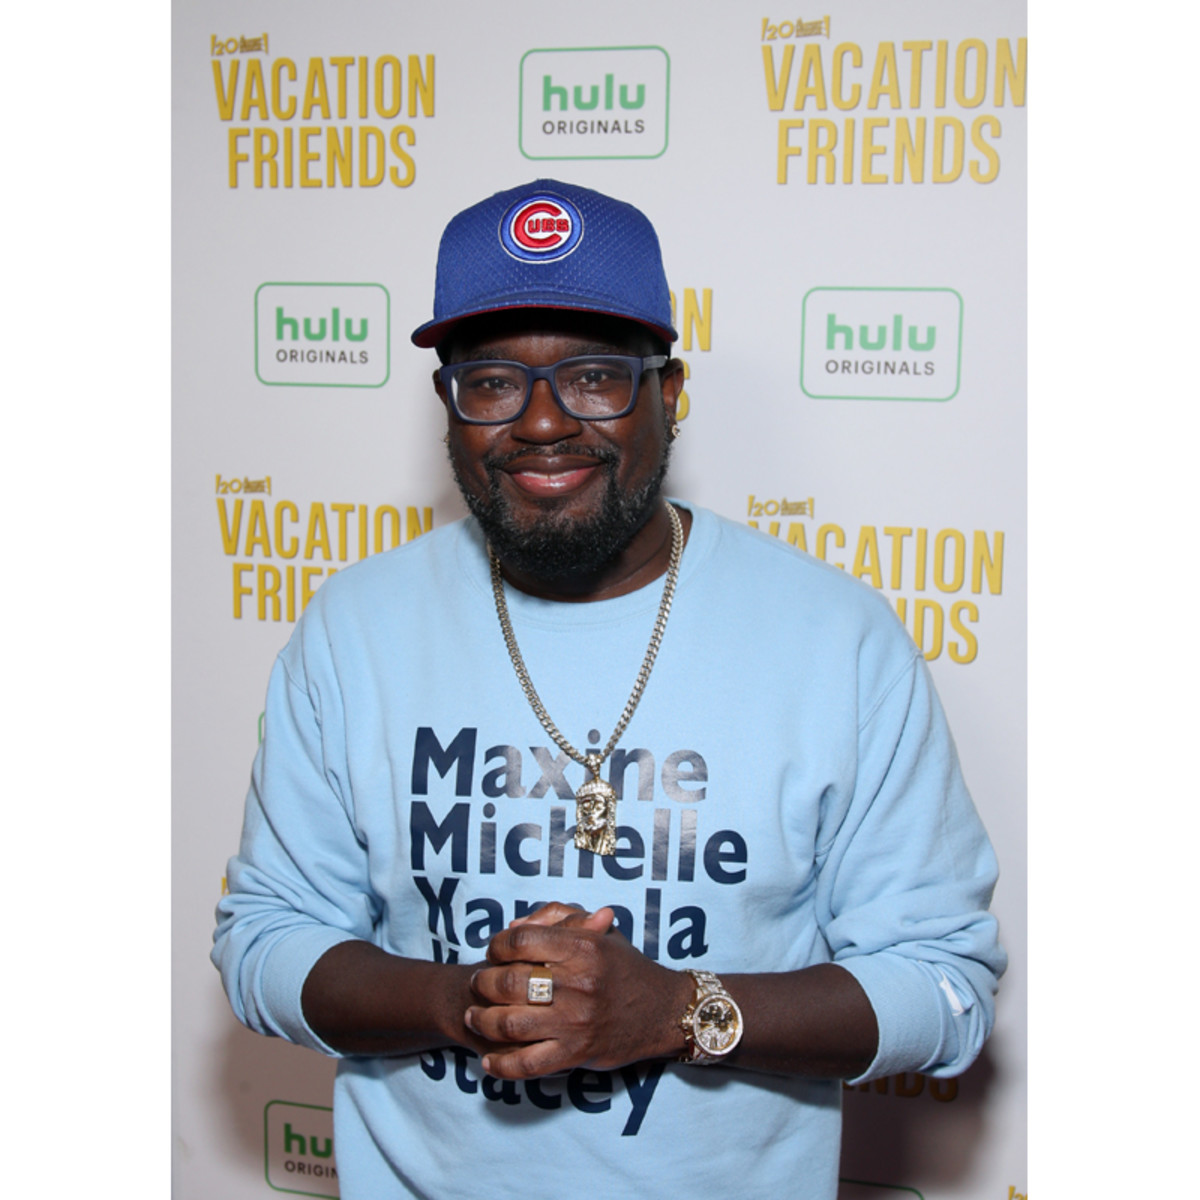 Lil Rel Howery attends the Vacation Friends Special VIP Pool Party Screening at The Hollywood Roosevelt on August 23, 2021 in Los Angeles.